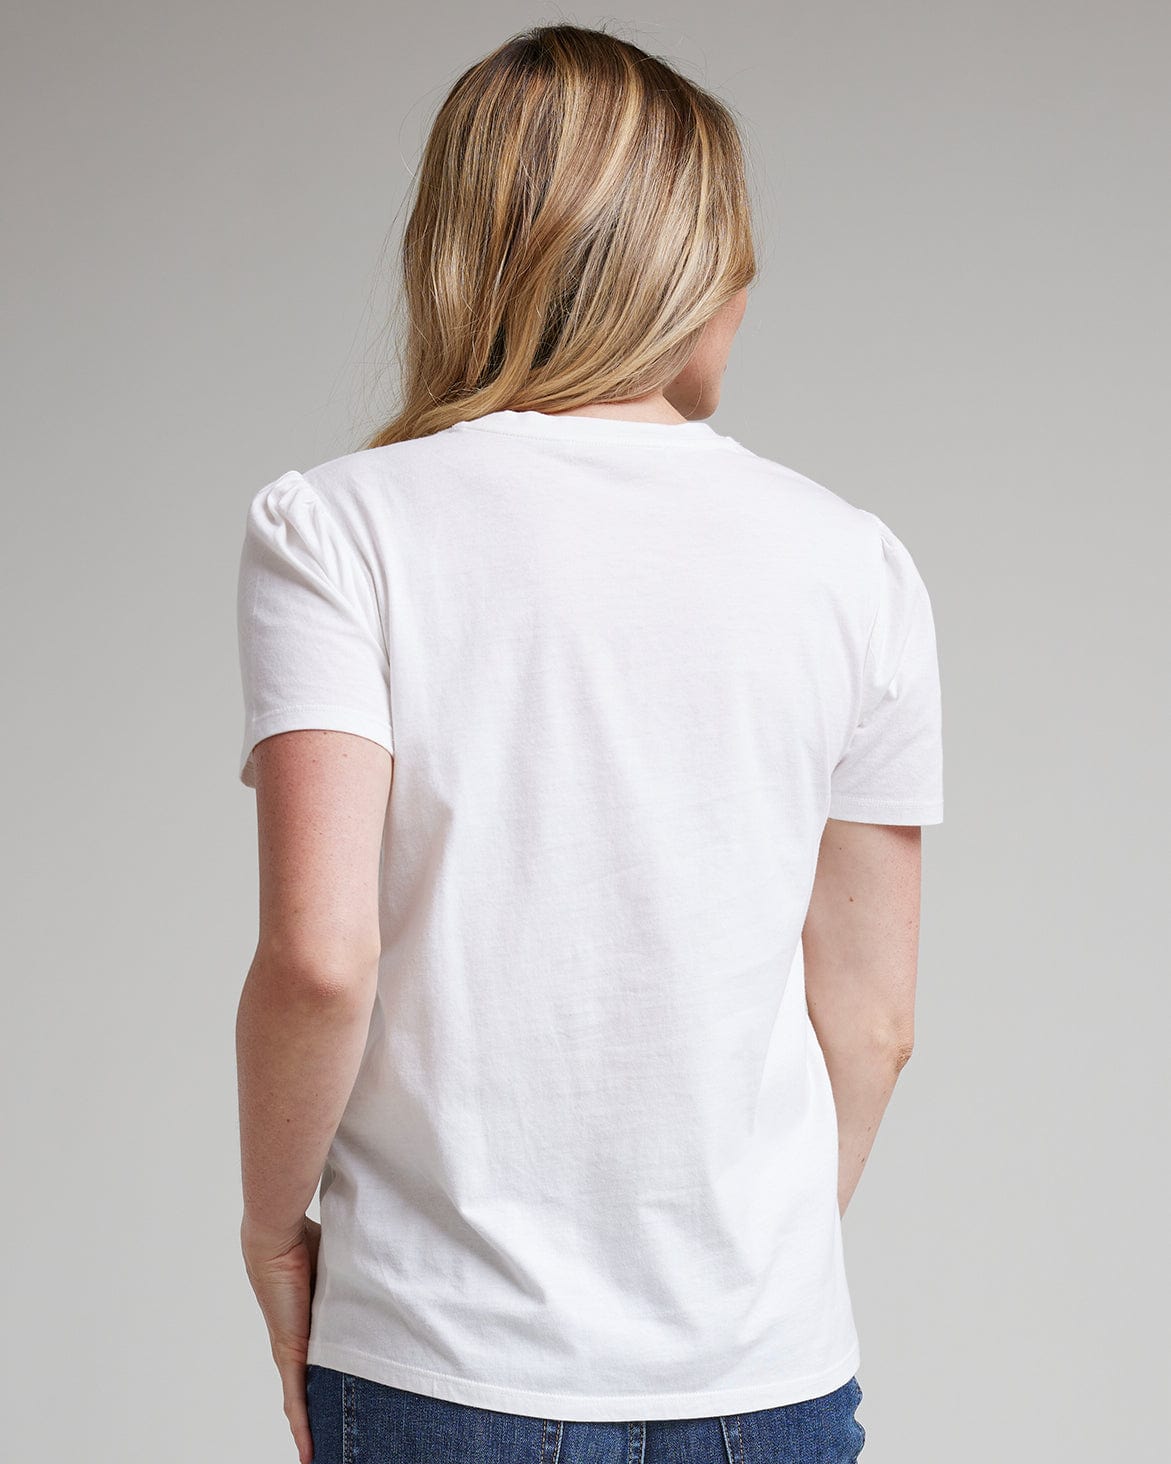 Woman in a white, short sleeve basic t-shirt